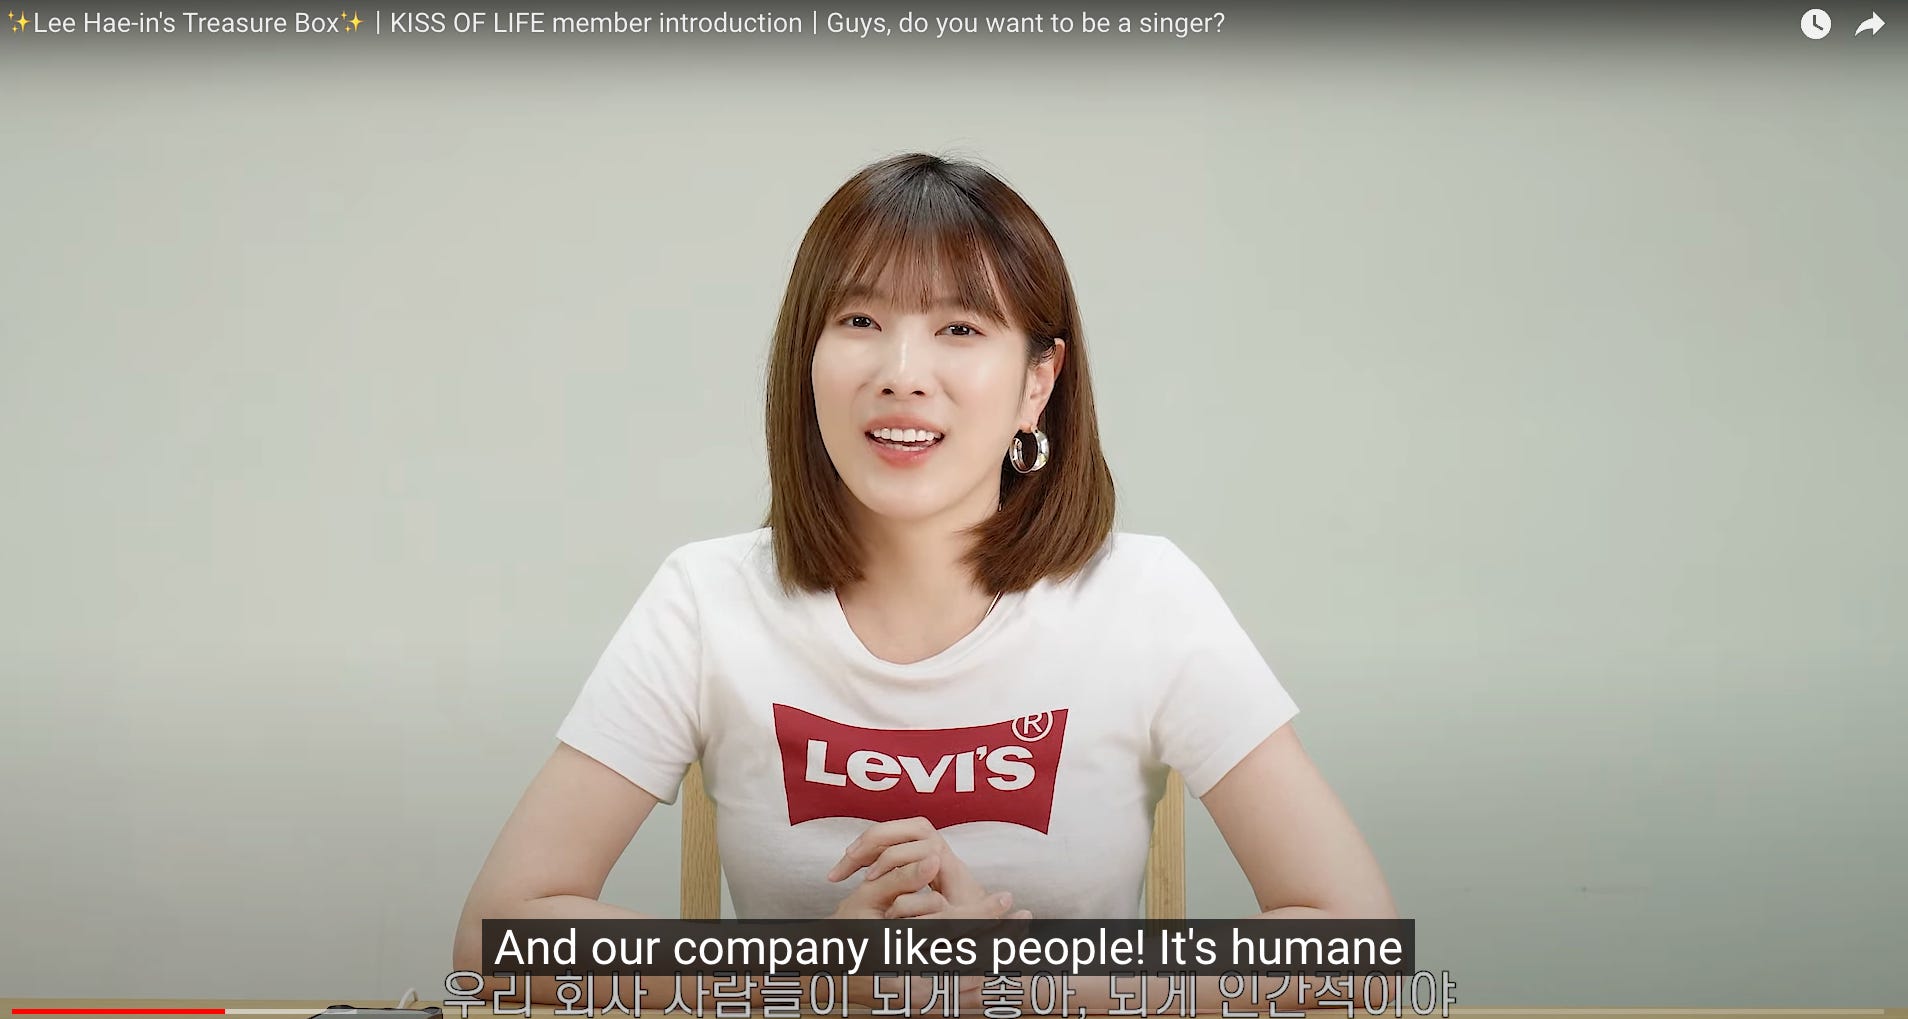 Screenshot of Lee Ha-in smiling, recalling telling Natty "And our company likes people! It's humane" with subtitles in Korean and English